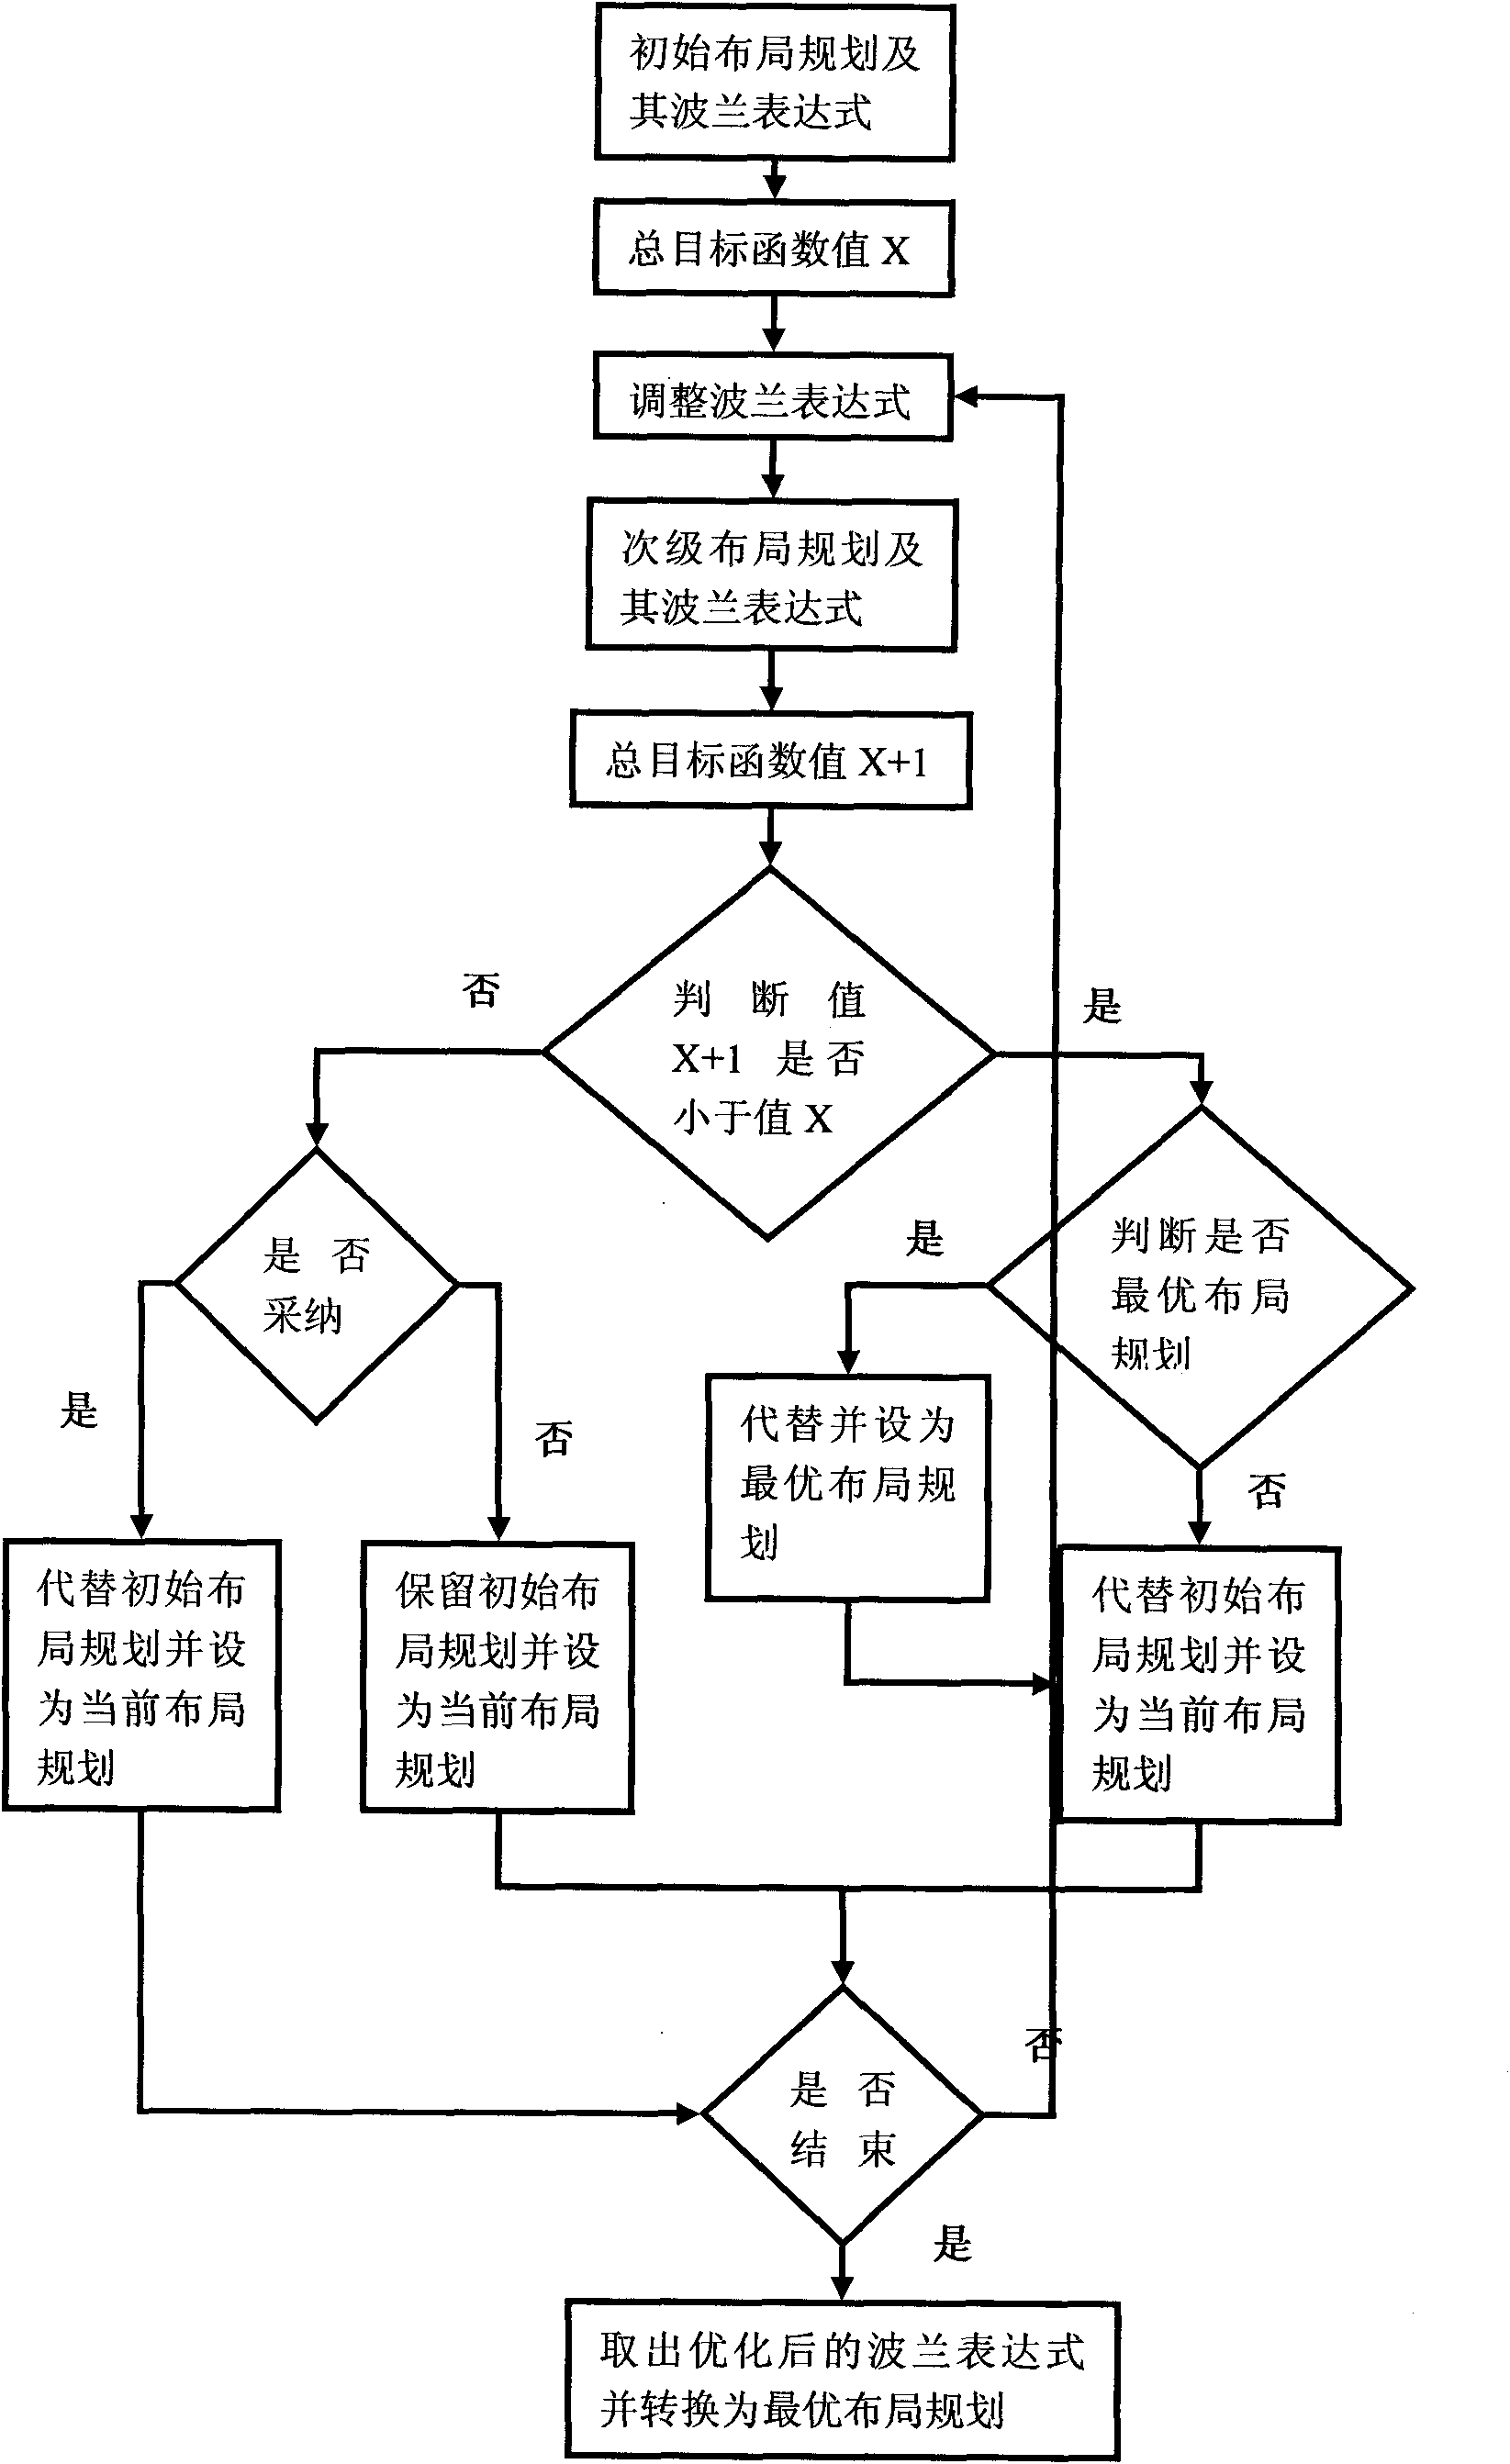 Multi-project wafer cutting method for improving finished product rate of chips